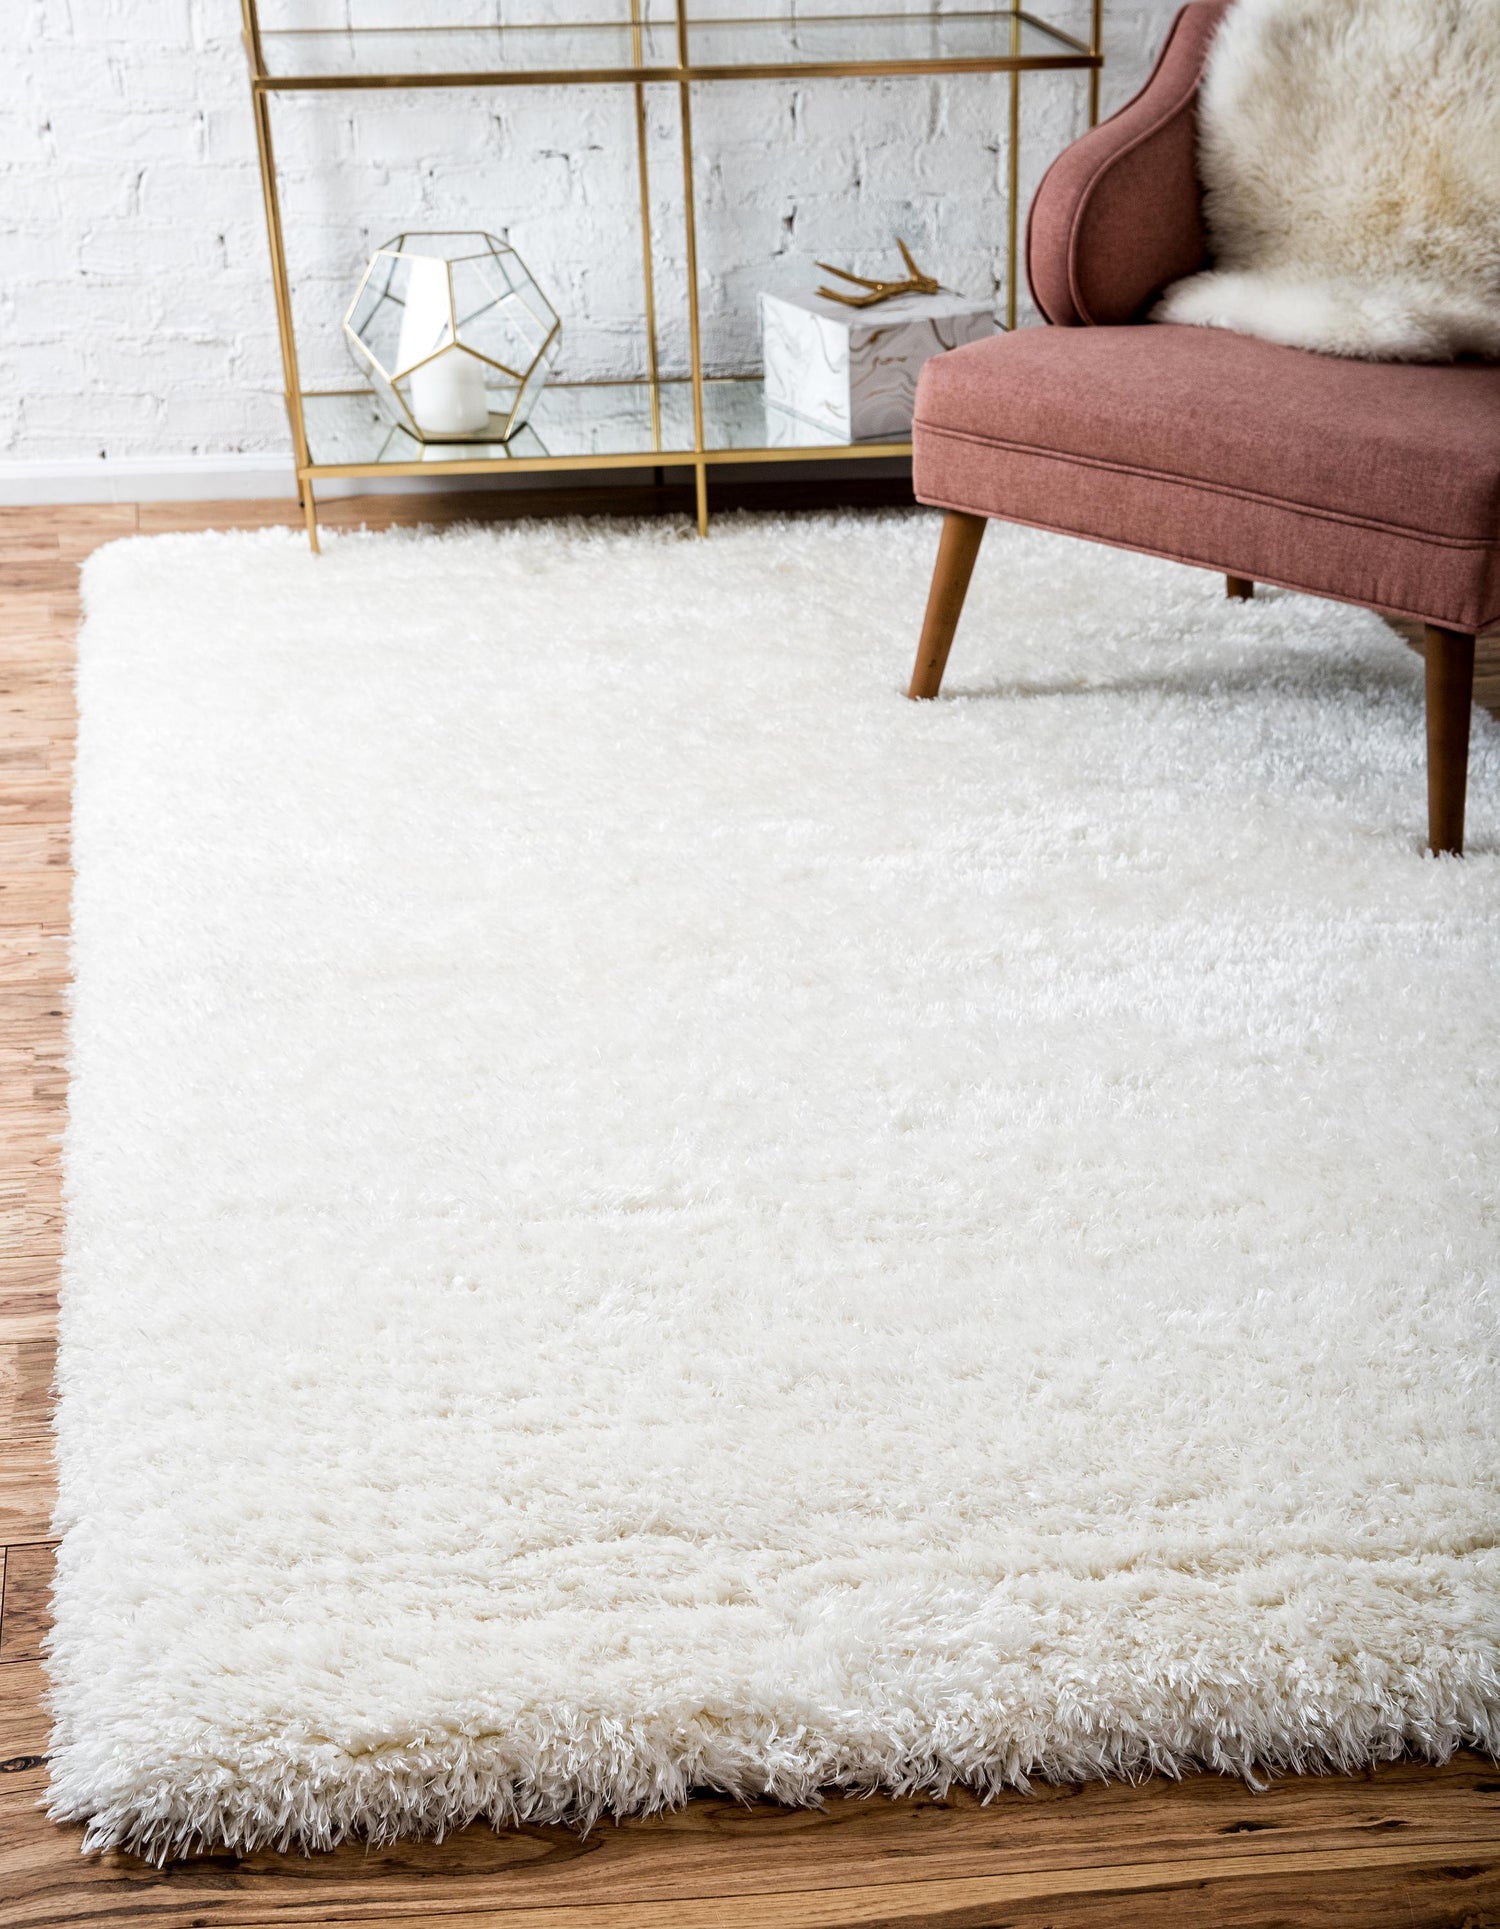 Haiden - Luxury Shaggy Area Rug - Nordic Side - feed-cl0-over-80-dollars, unique-loom, us-only, us-ship